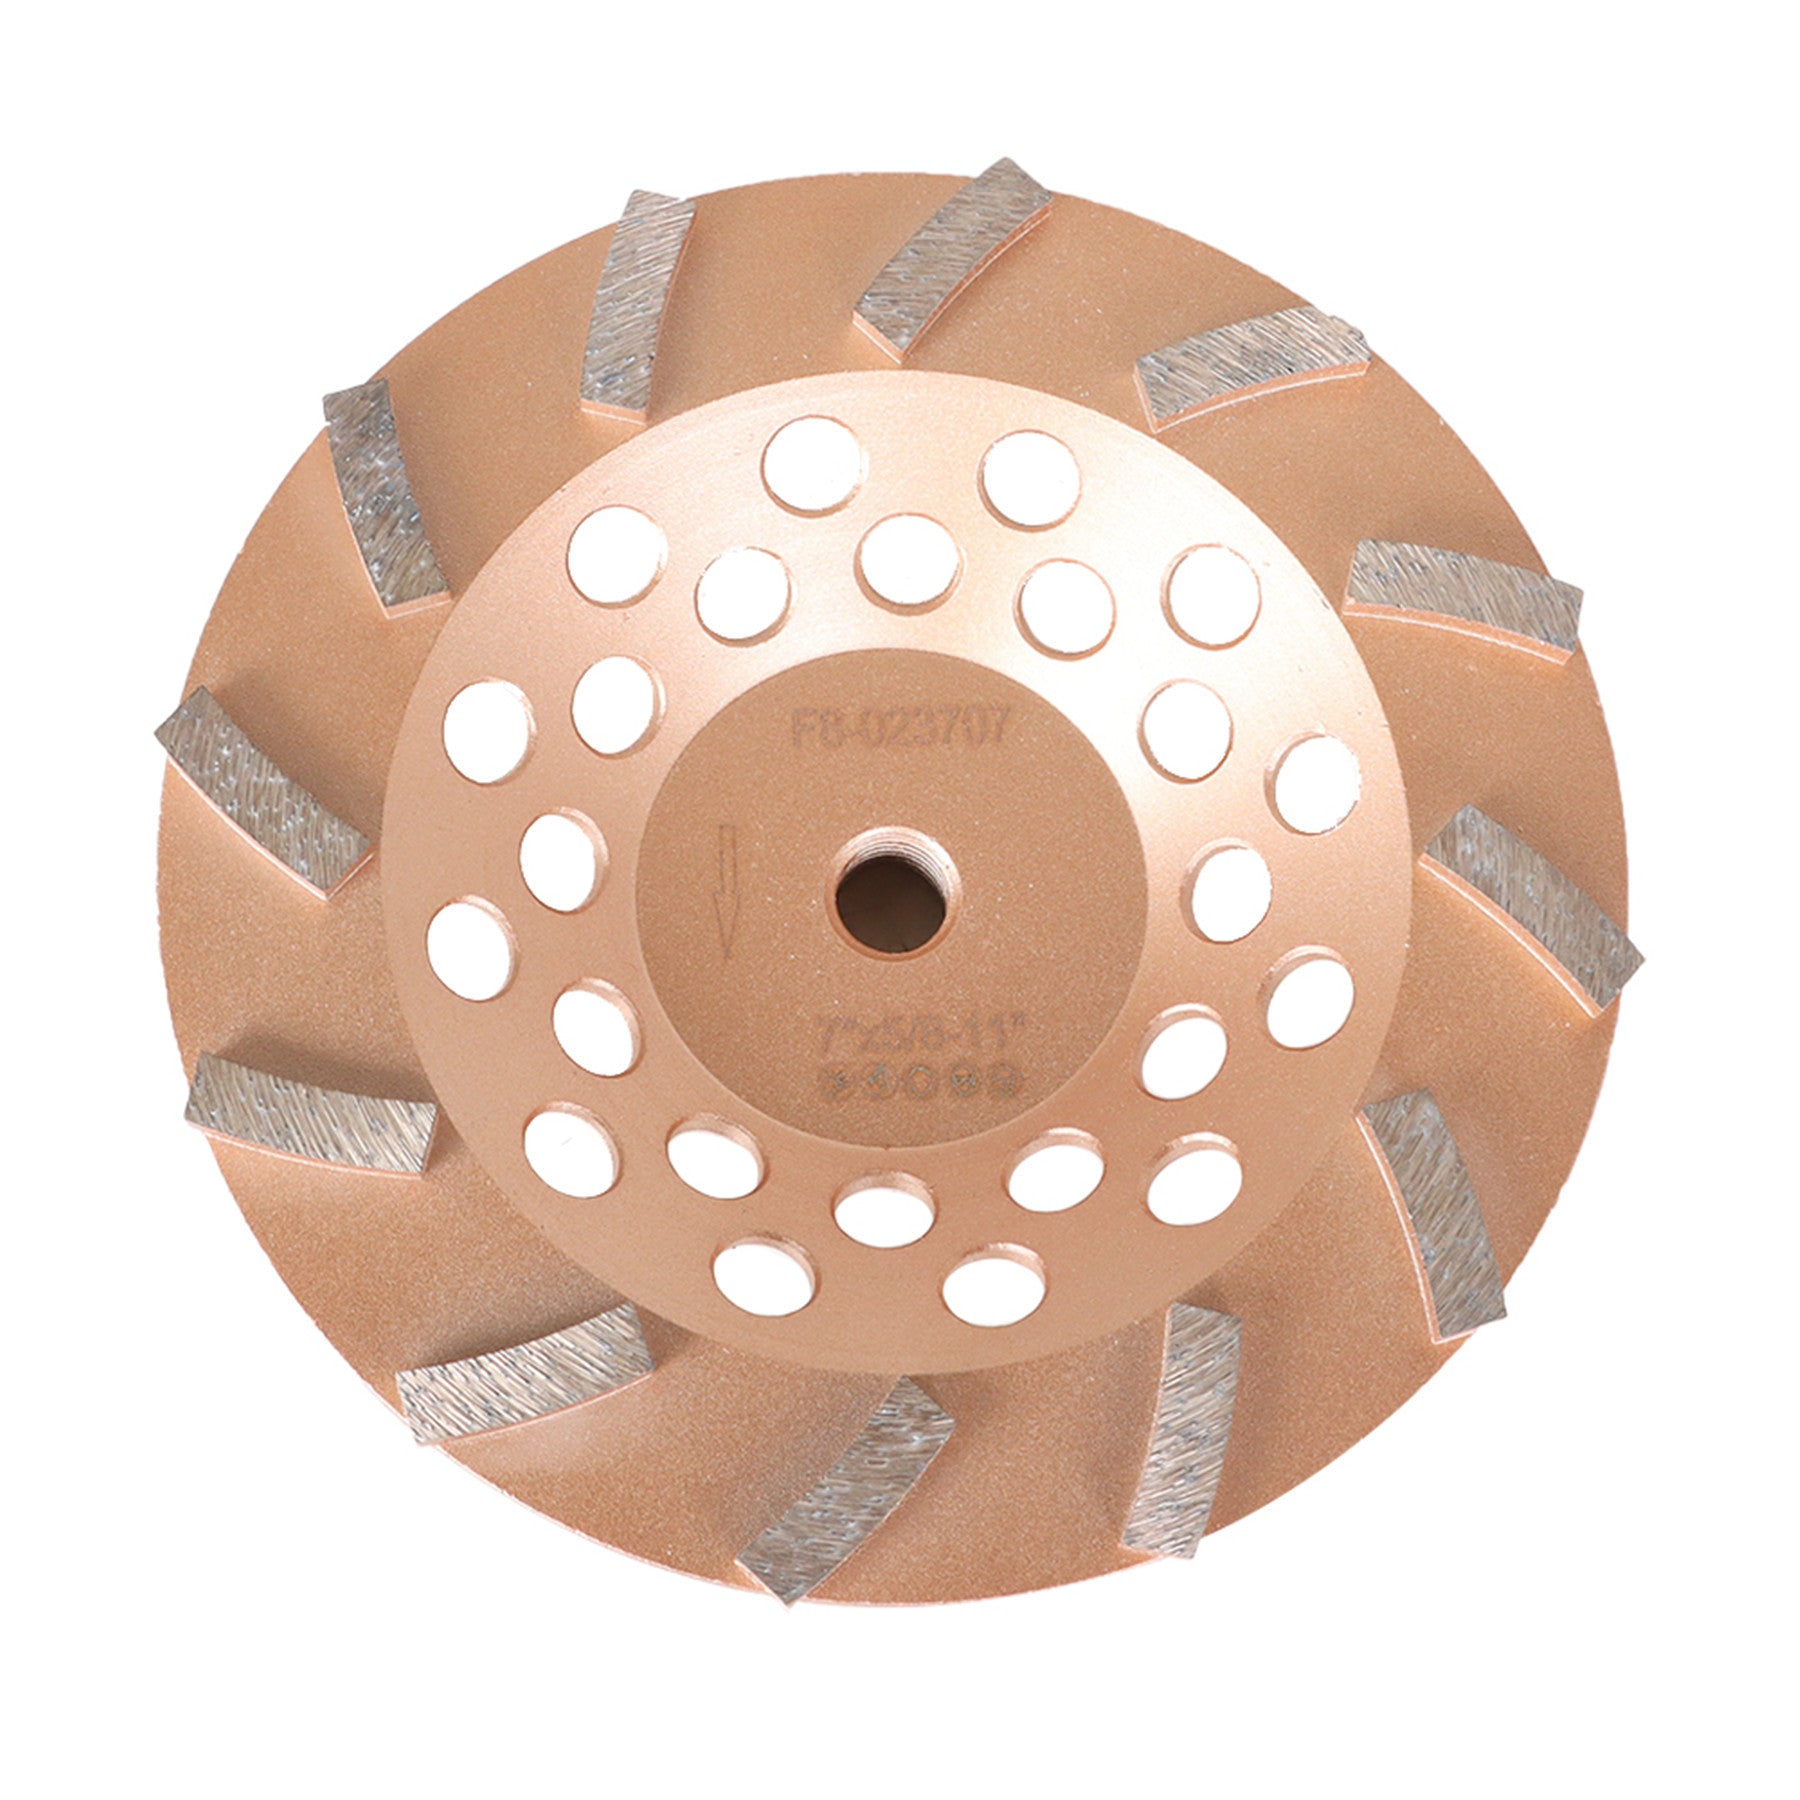 findmall  7 Inch 12 Turbo Diamond Segments 5/8 Inch -11 Arbor Grinding Wheels Diamond Cup Grinding Wheels Fit for Concrete and Masonry Available FINDMALLPARTS